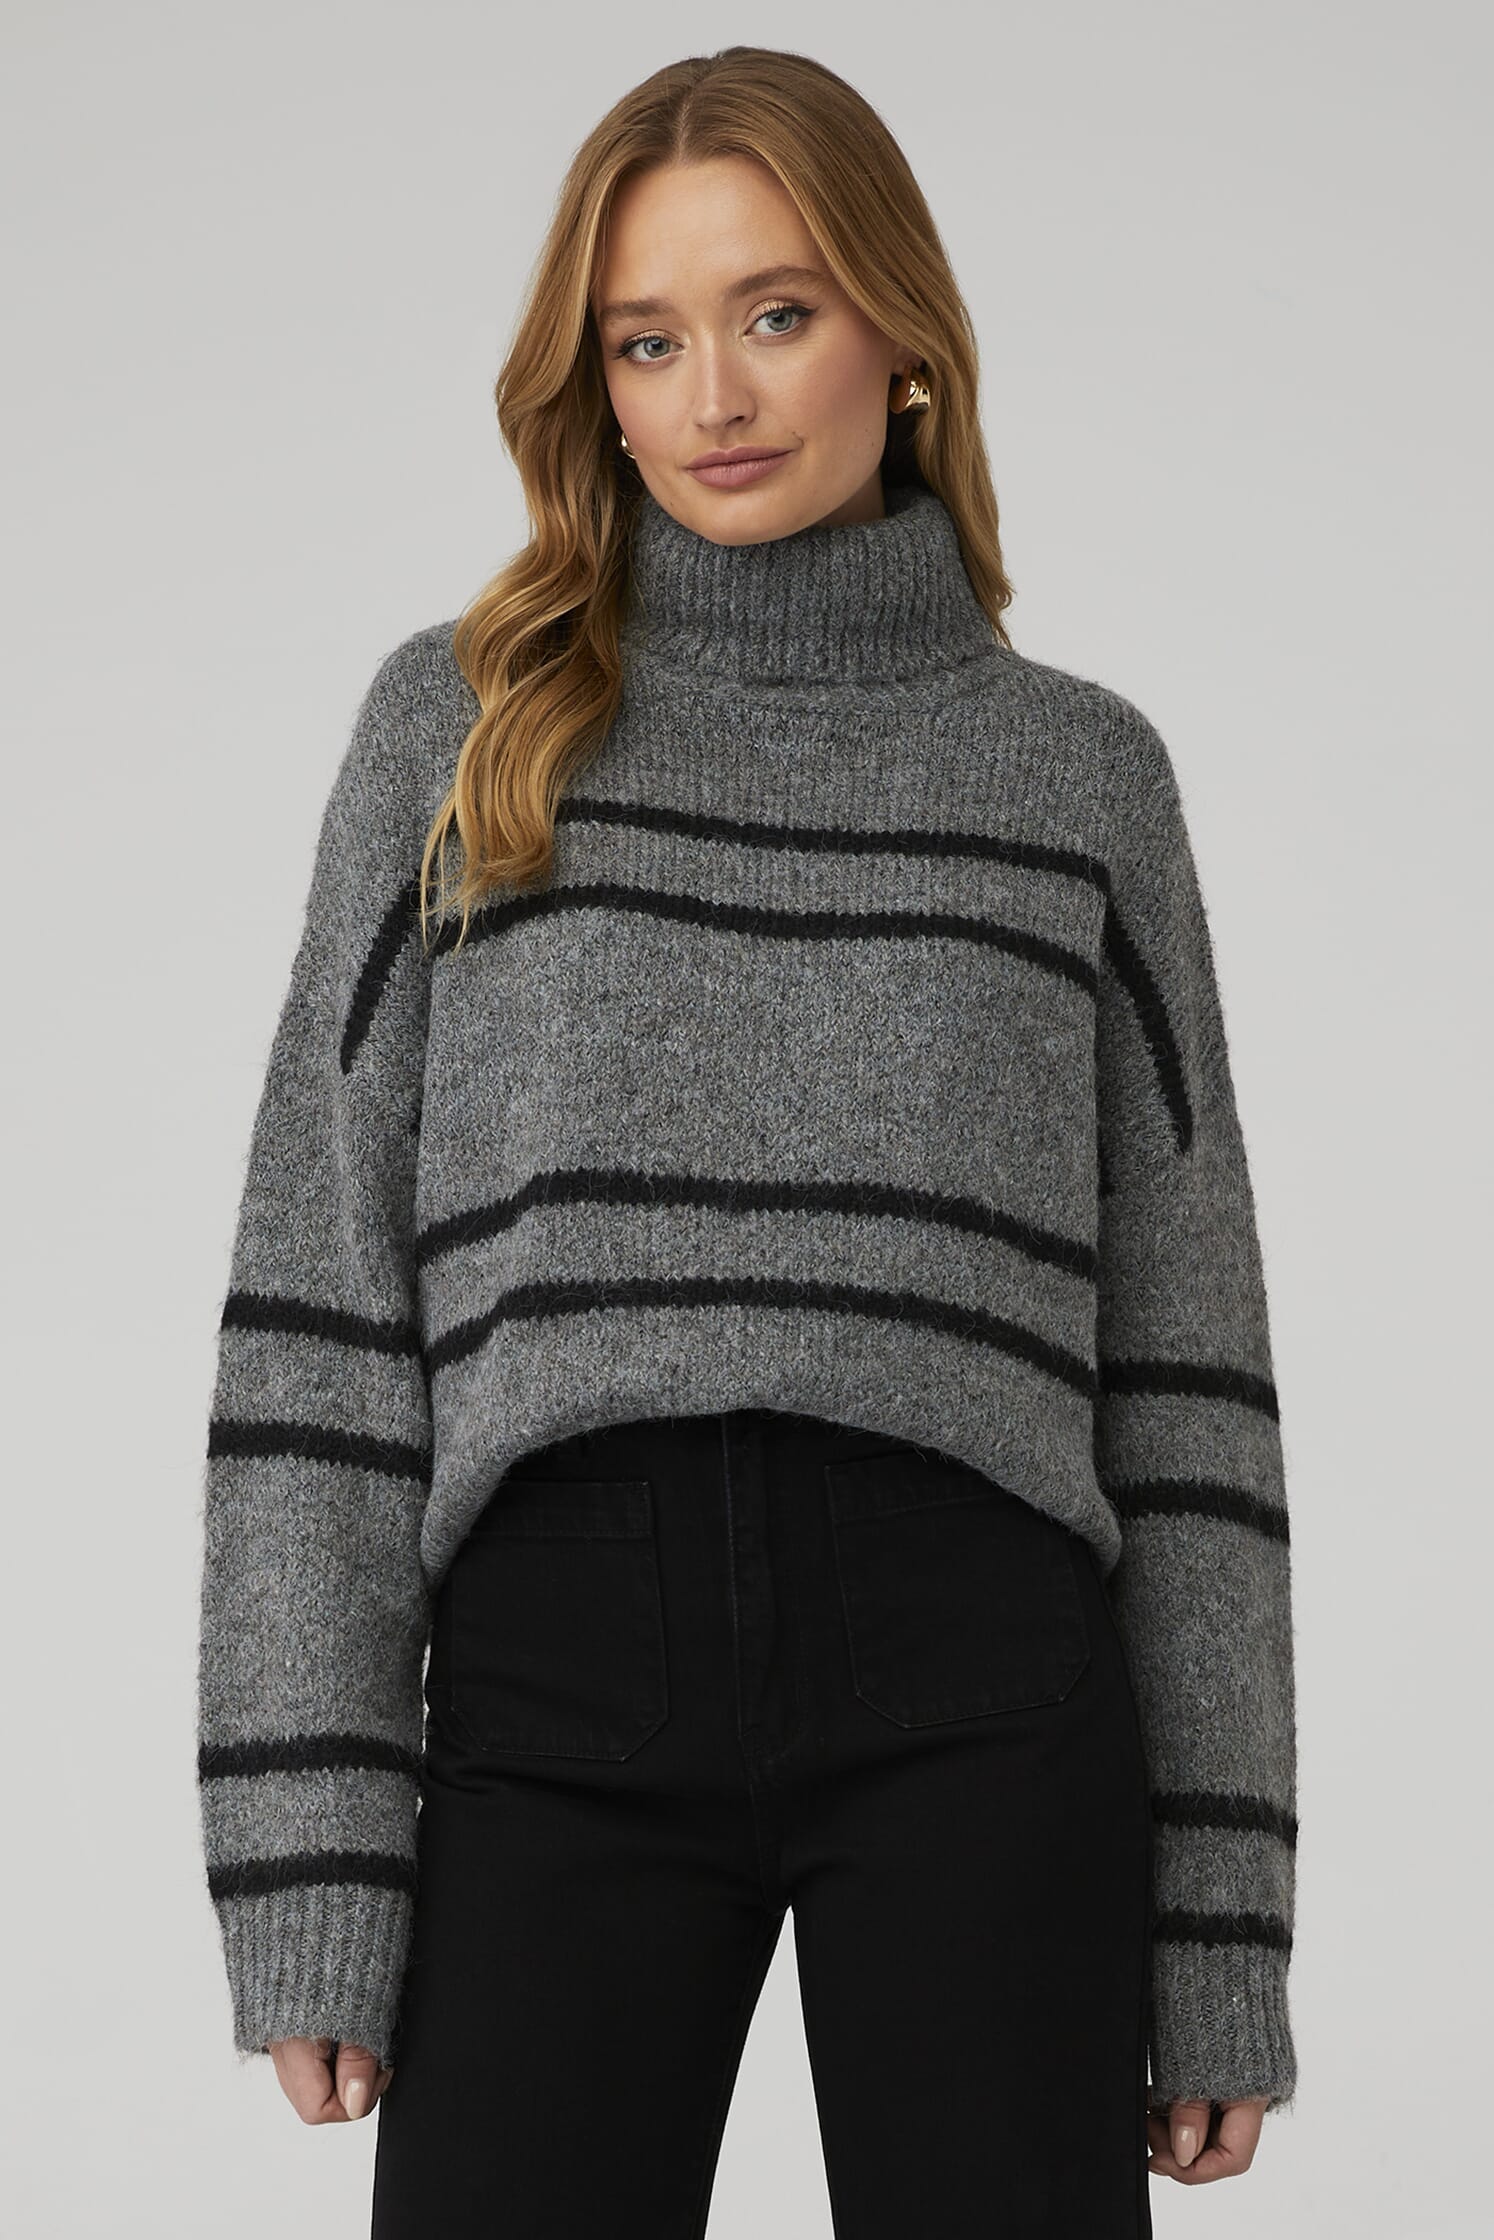 Line & Dot | Veronica Sweater in Grey And Black| FashionPass